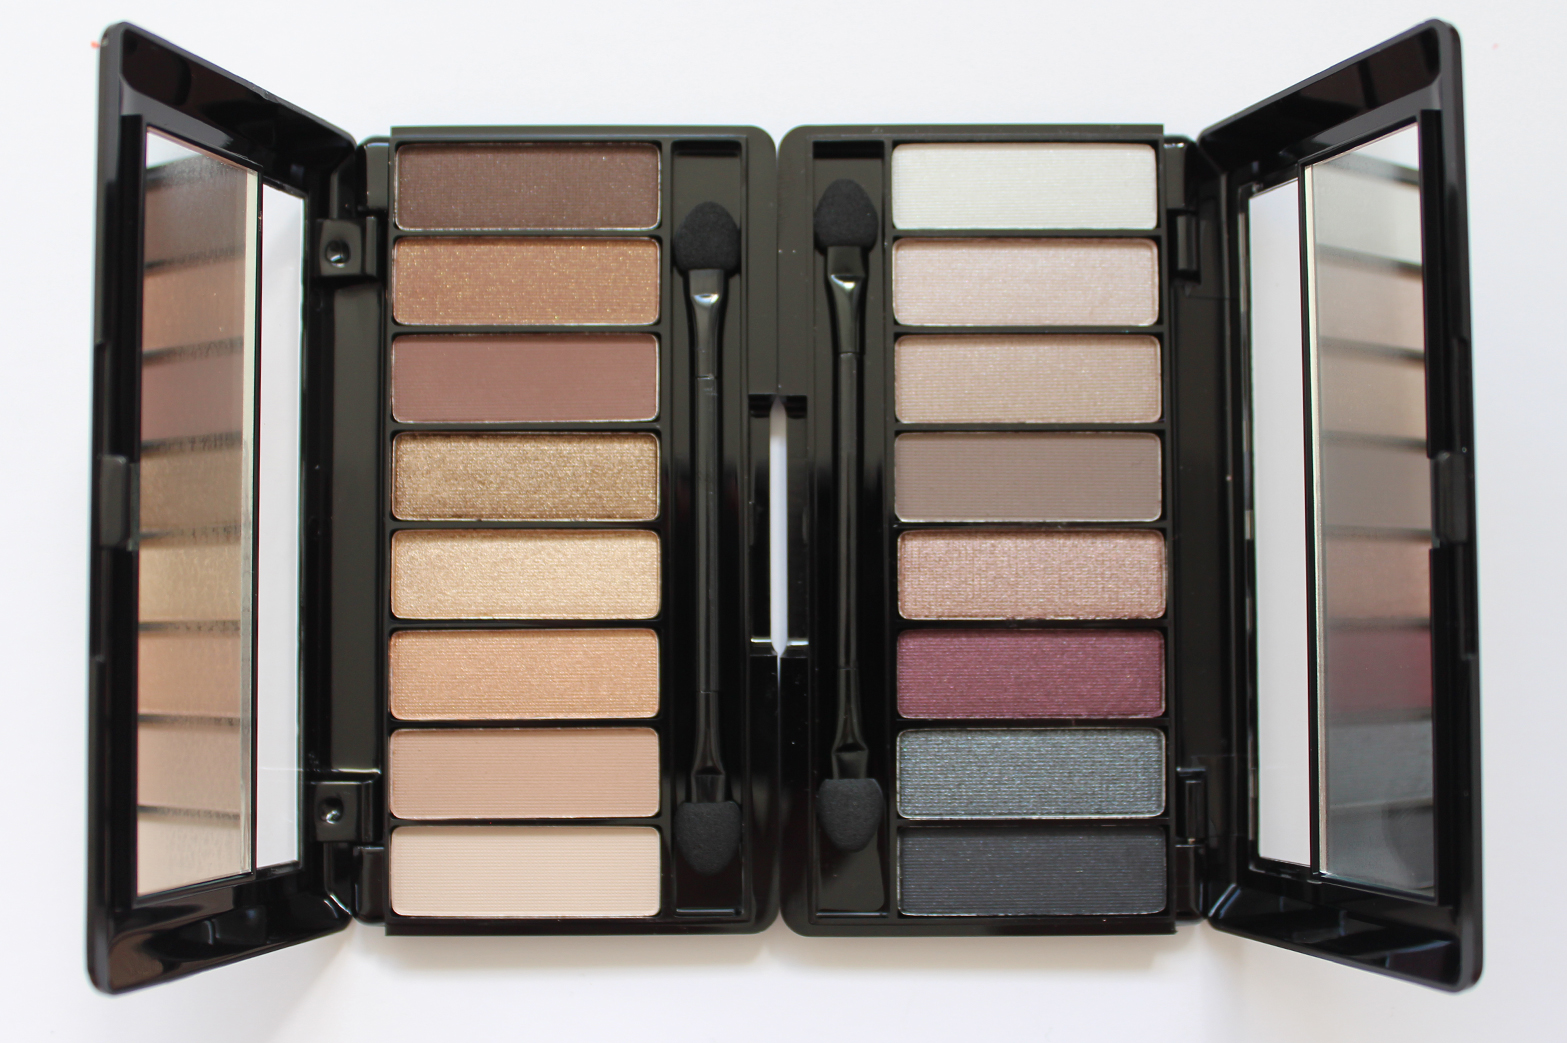 RIMMEL | Magnif'eyes Contouring Eye Palettes - Review + Swatches - CassandraMyee